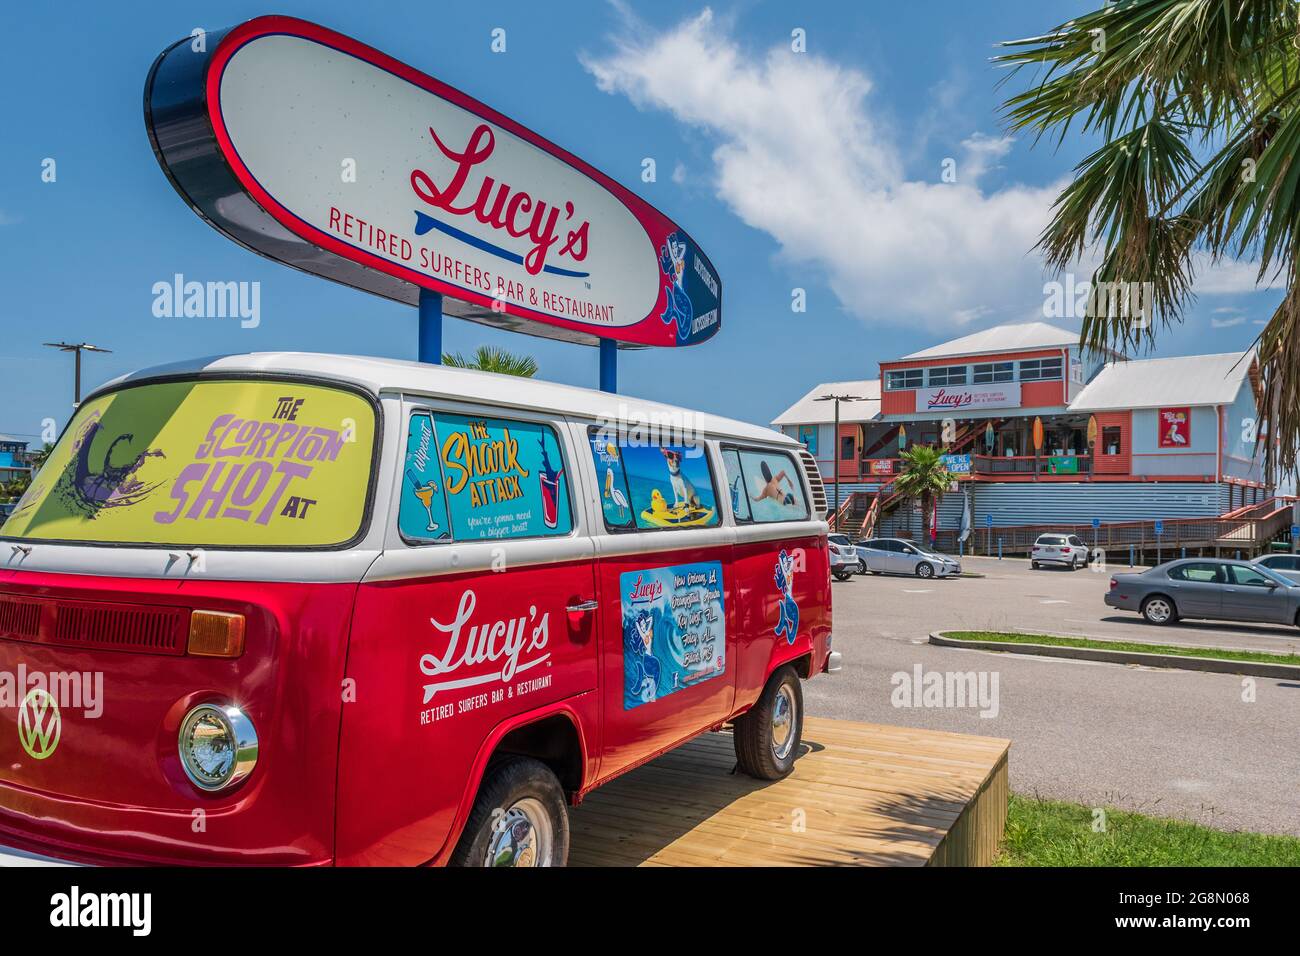 Lucy's Retired Surfers Bar and Restaurant in Biloxi, Mississippi, USA Stock Photo